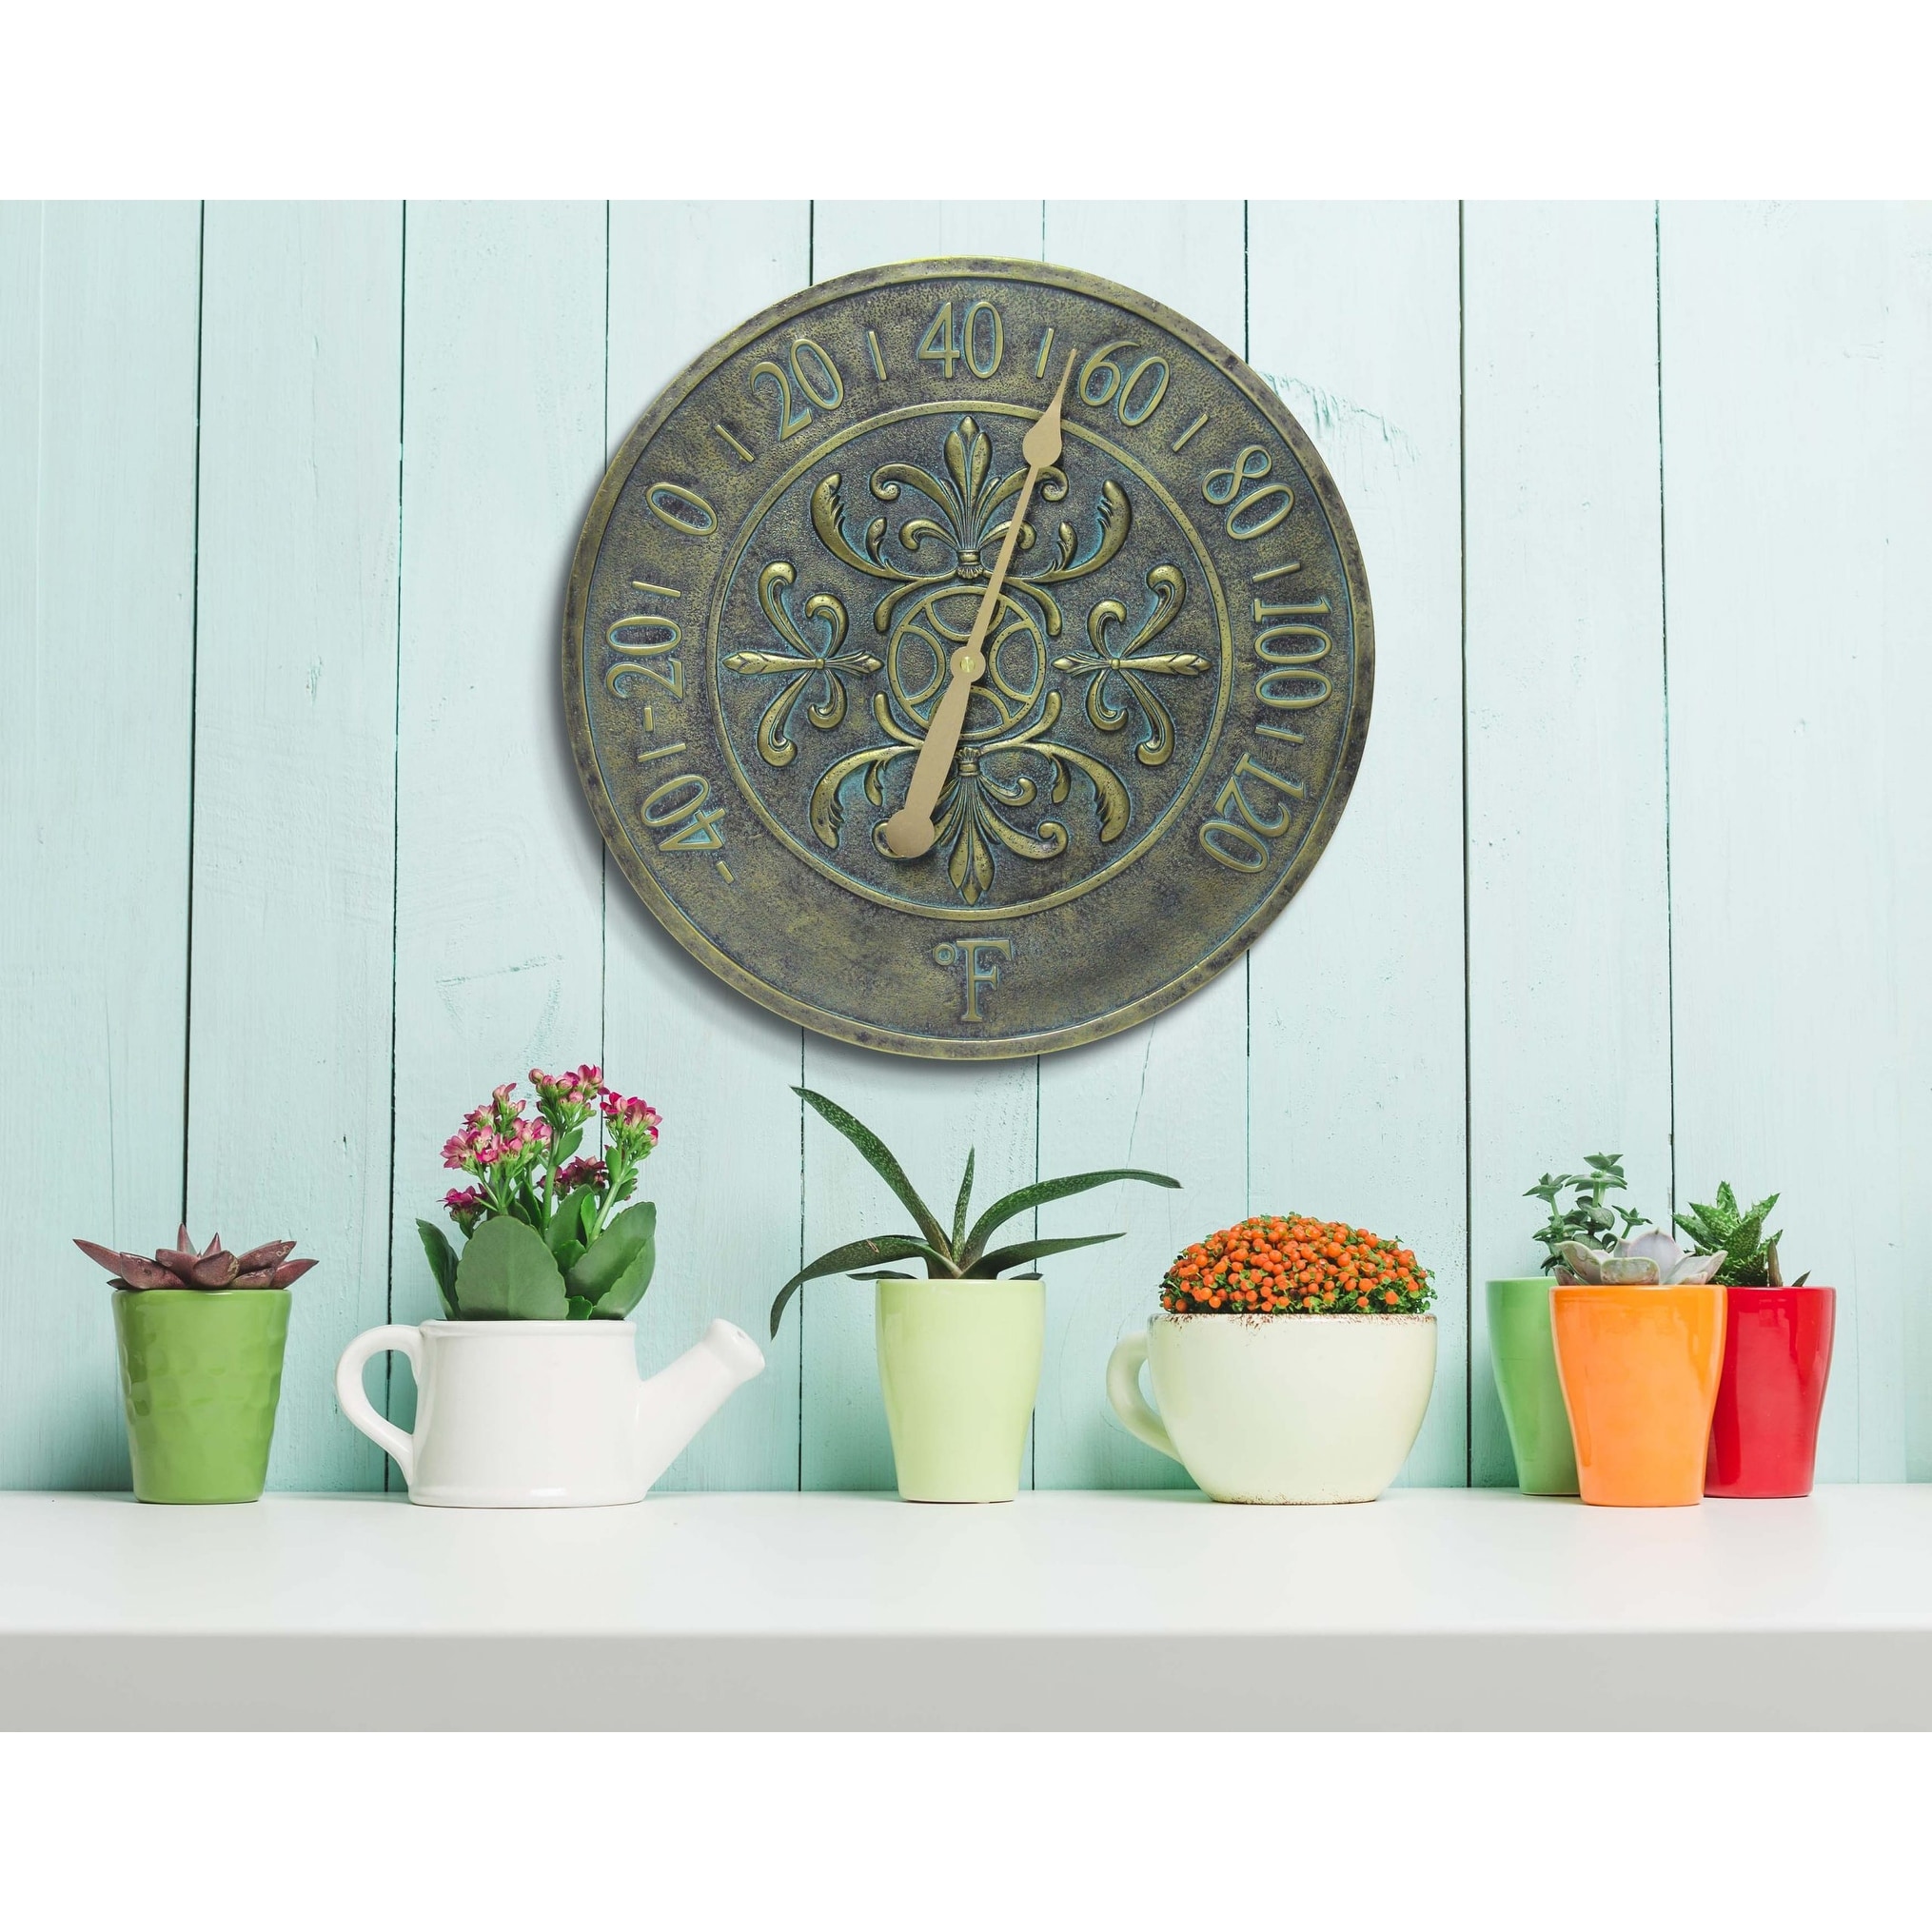 https://ak1.ostkcdn.com/images/products/is/images/direct/9ad30168eb2f86213fd1e0509643598d4d04acc0/Blanc-Fleur-Outdoor-Decorative-Round-15-inch-Wall-Thermometer-by-Infinity-Instruments.jpg